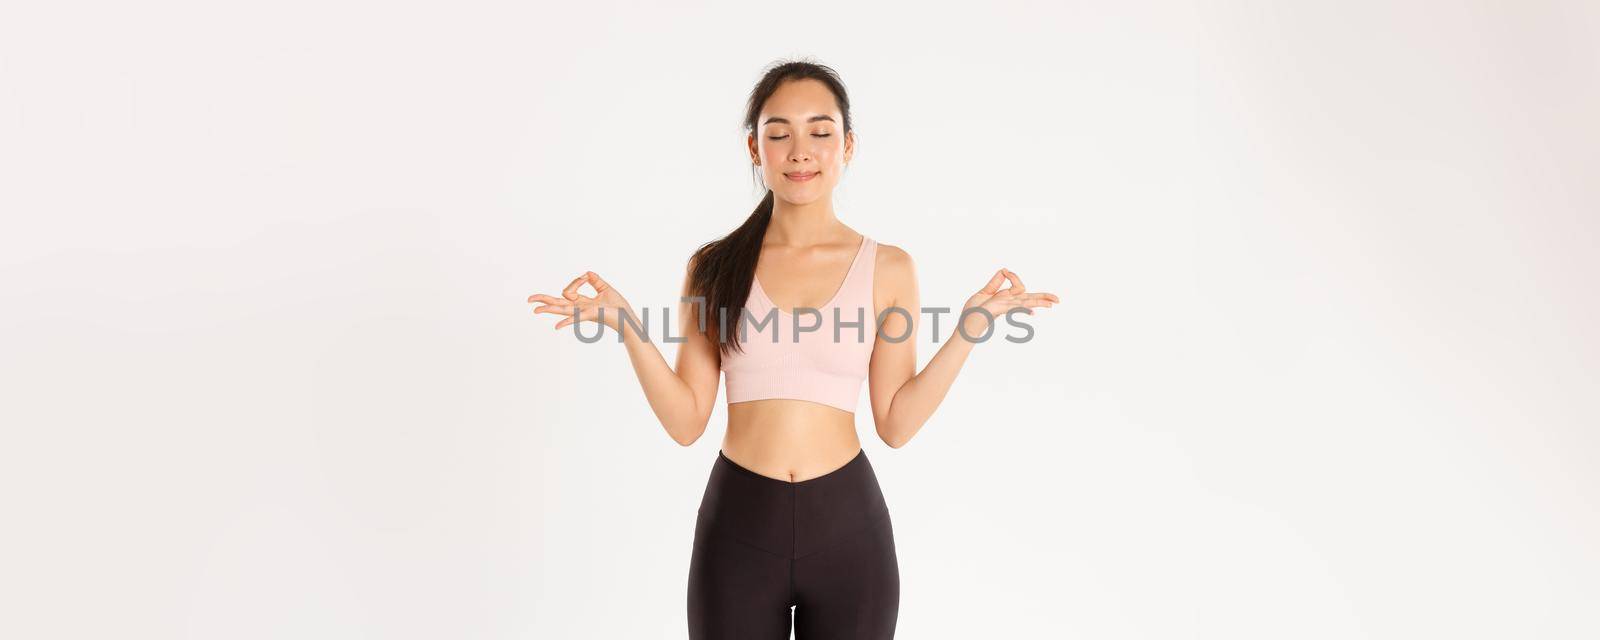 Sport, wellbeing and active lifestyle concept. Smiling calm and relaxed fitness girl, woman in sportswear close eyes and standing in lotus pose, reach nirvana on yoga classes, meditating.